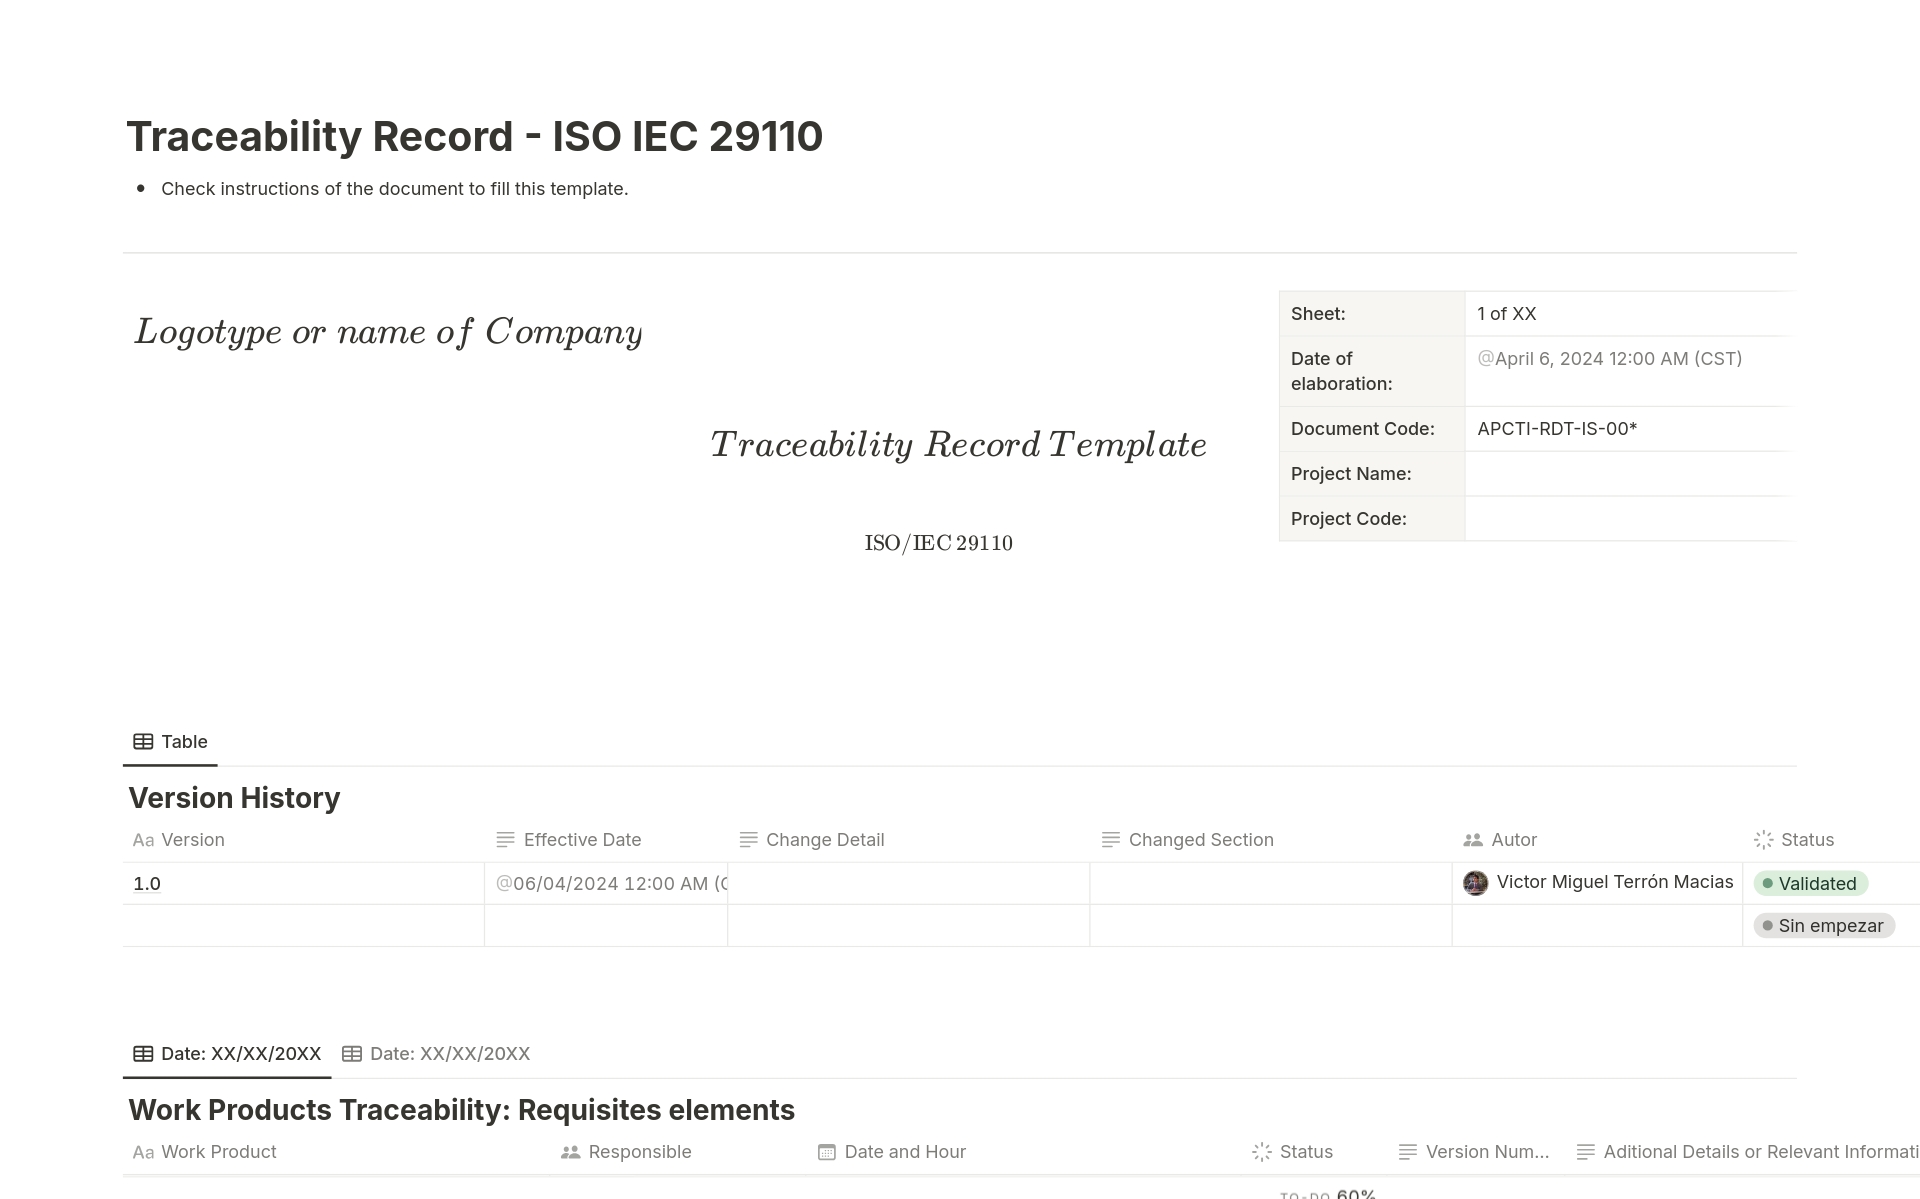 This traceability record template aligns with the requirements of the ISO/IEC and covers all the elements indicated. This template could be used in any project and with any other standard. 